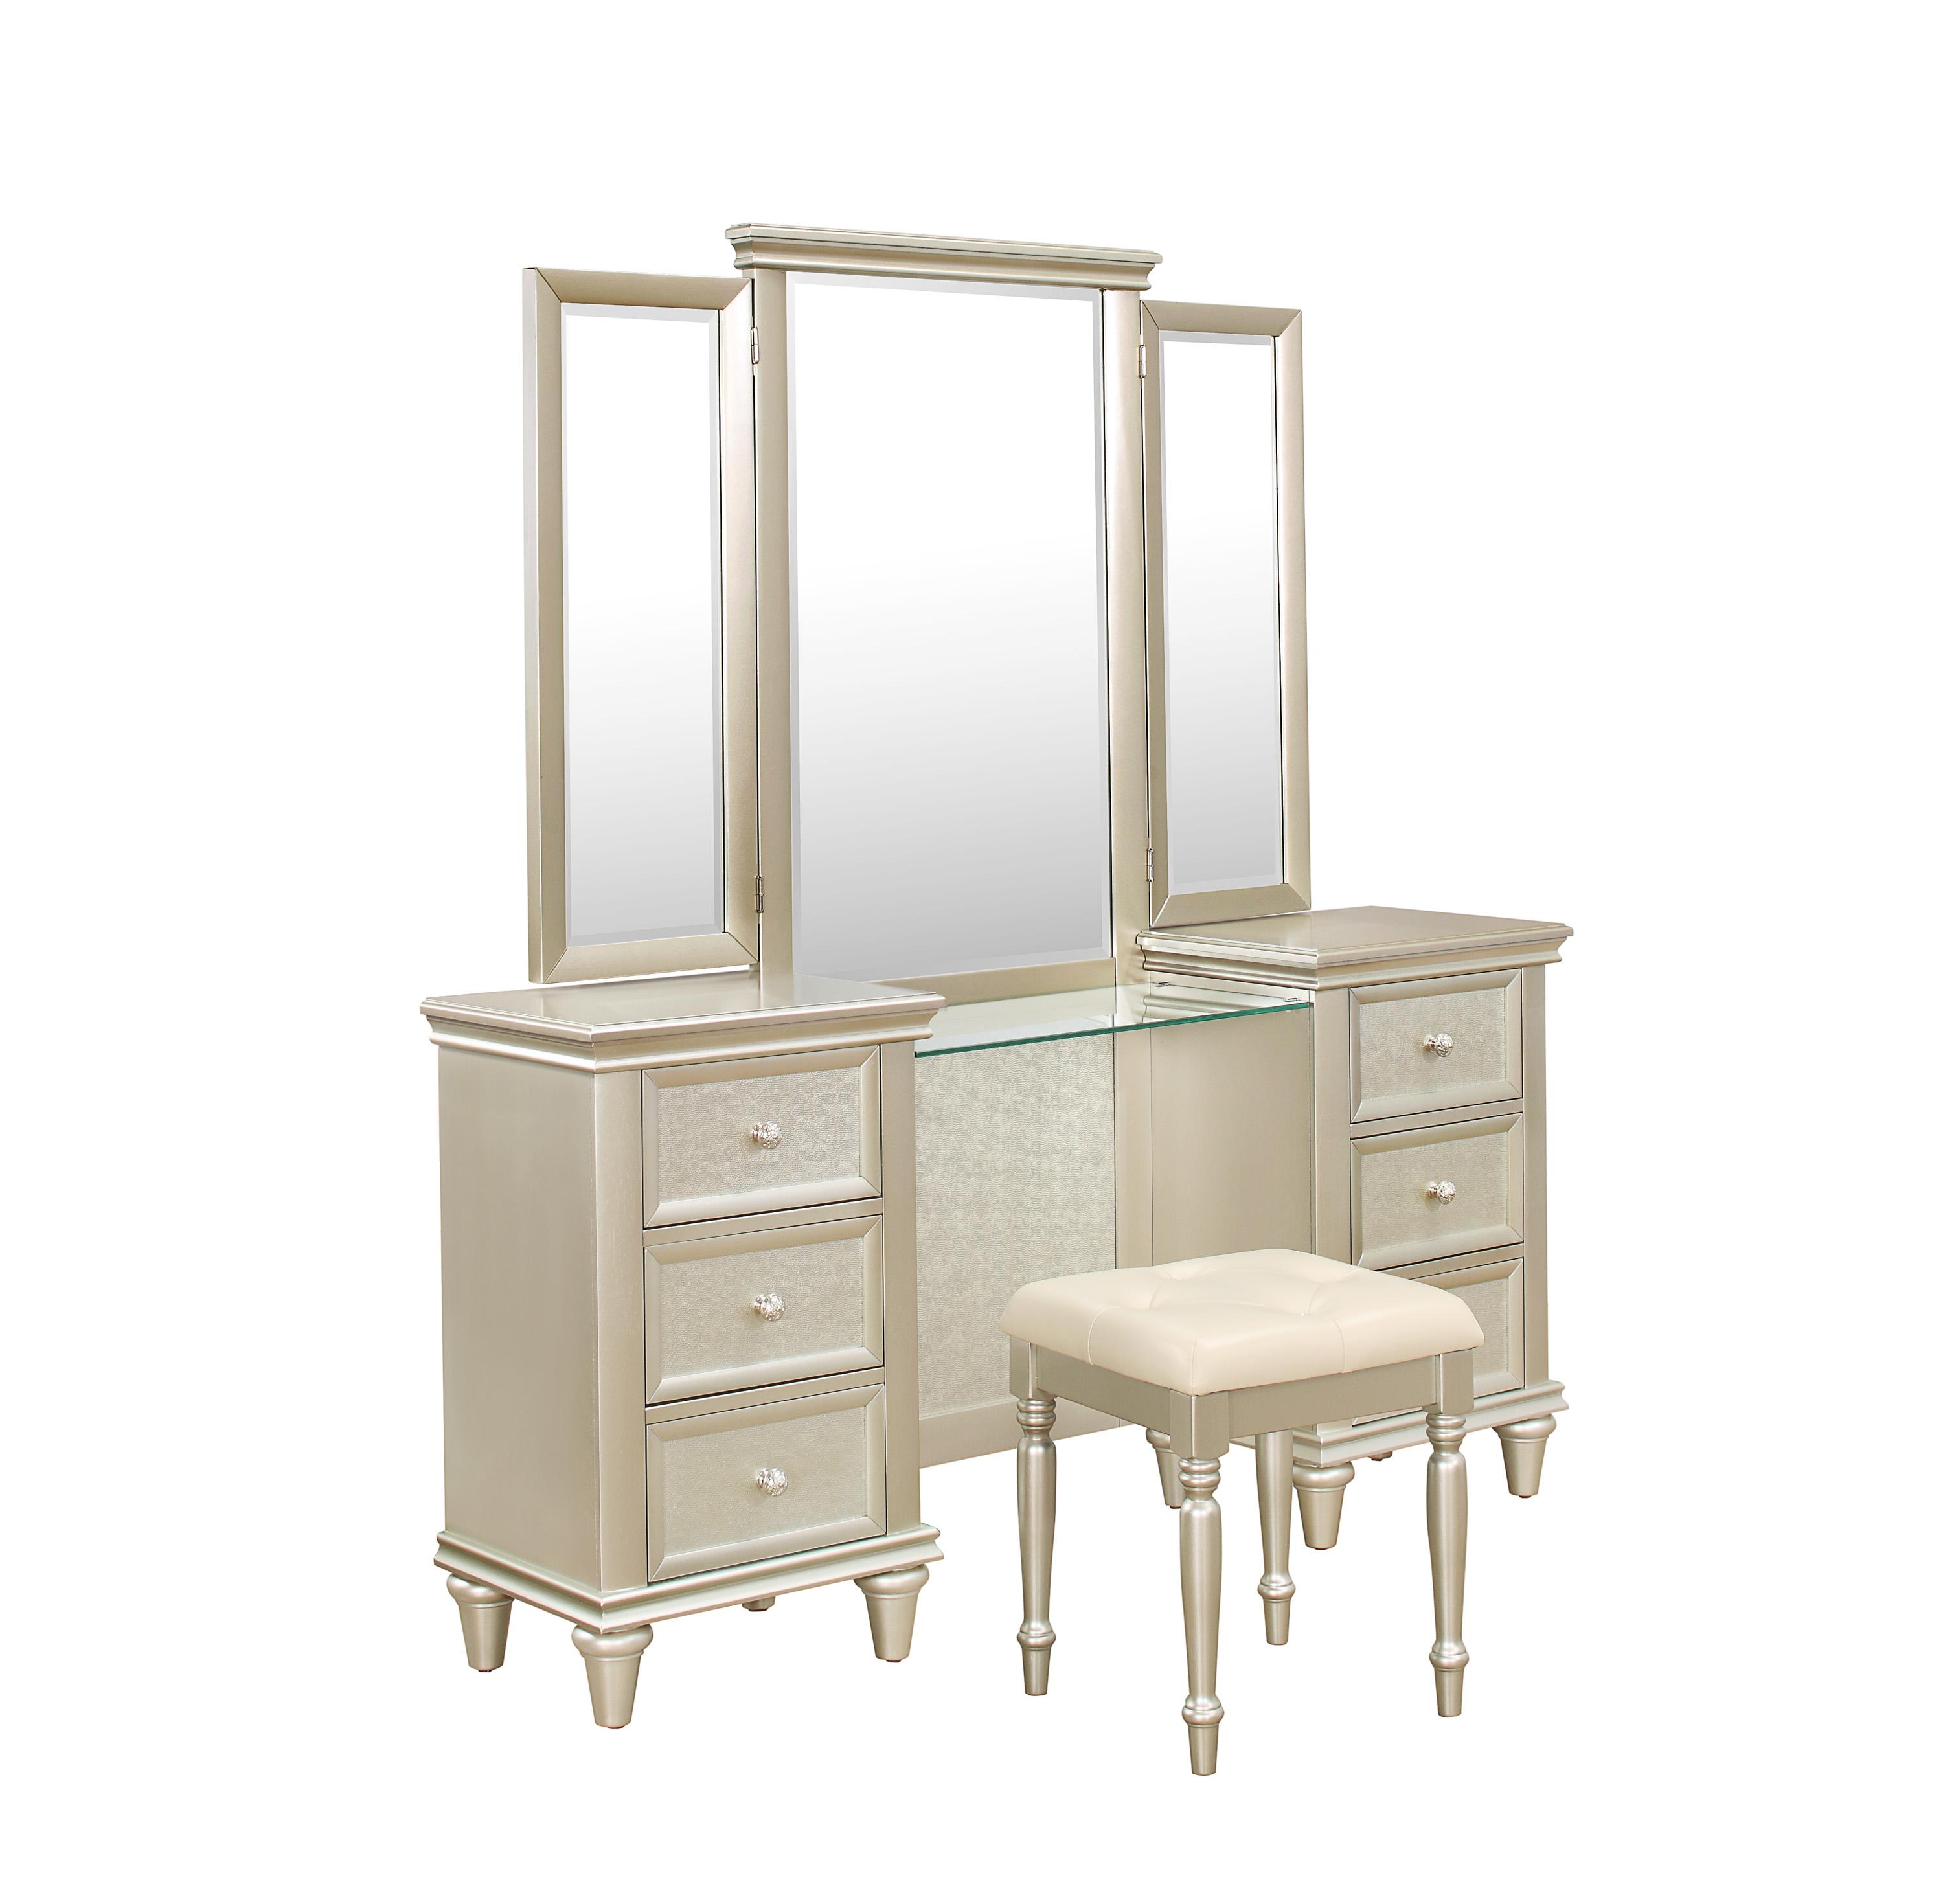 Traditional Vanity Cabinet 1928-15*14 Celandine 1928-15*14 in Off-White, Silver 